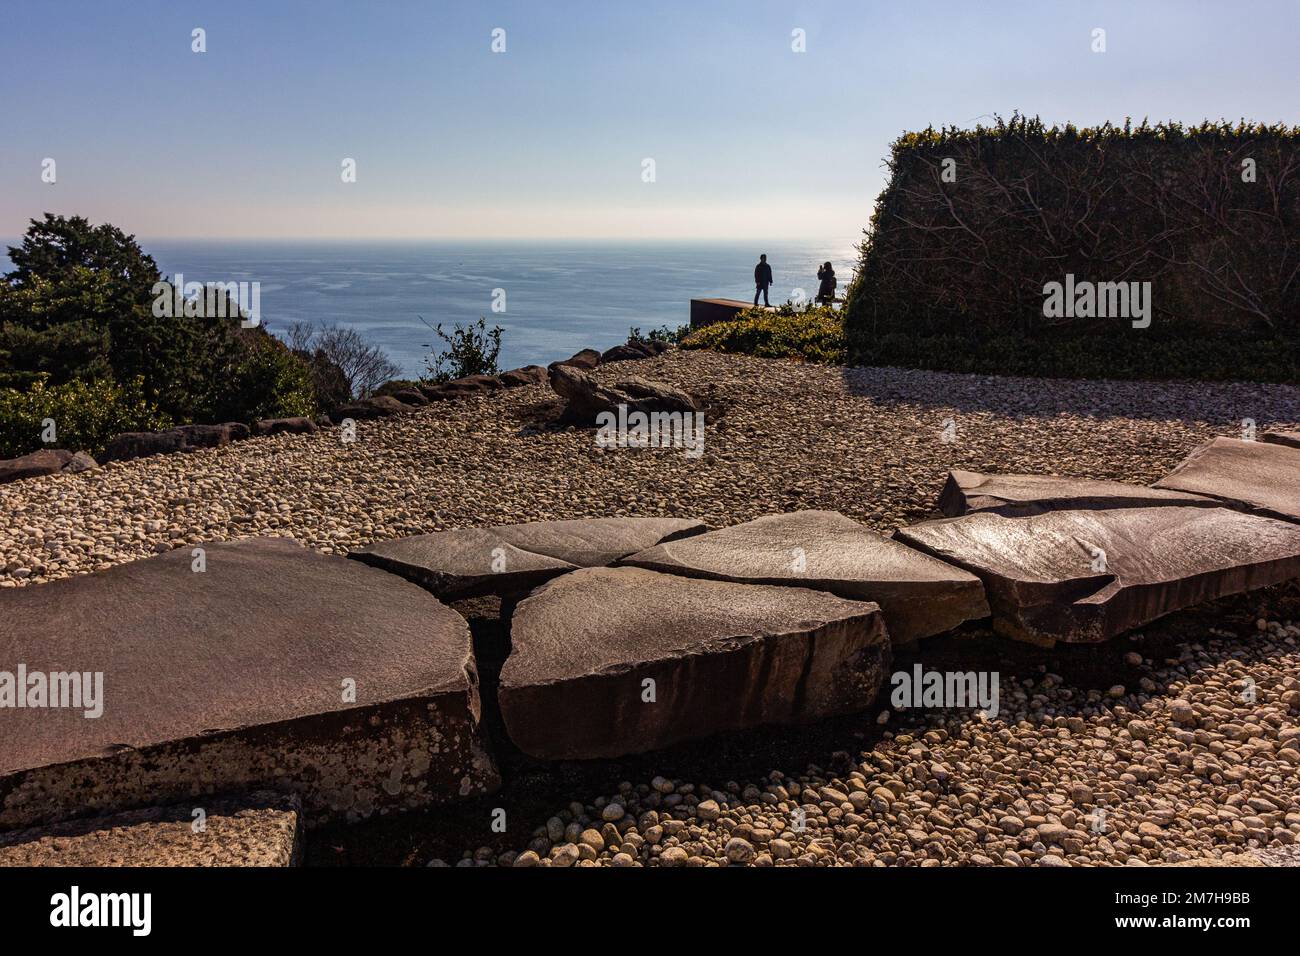 Enoura Observatory Garden   Based on the concept of a return to the origins of mankind and art, the Enoura Observatory was created on a scenic spot on Stock Photo